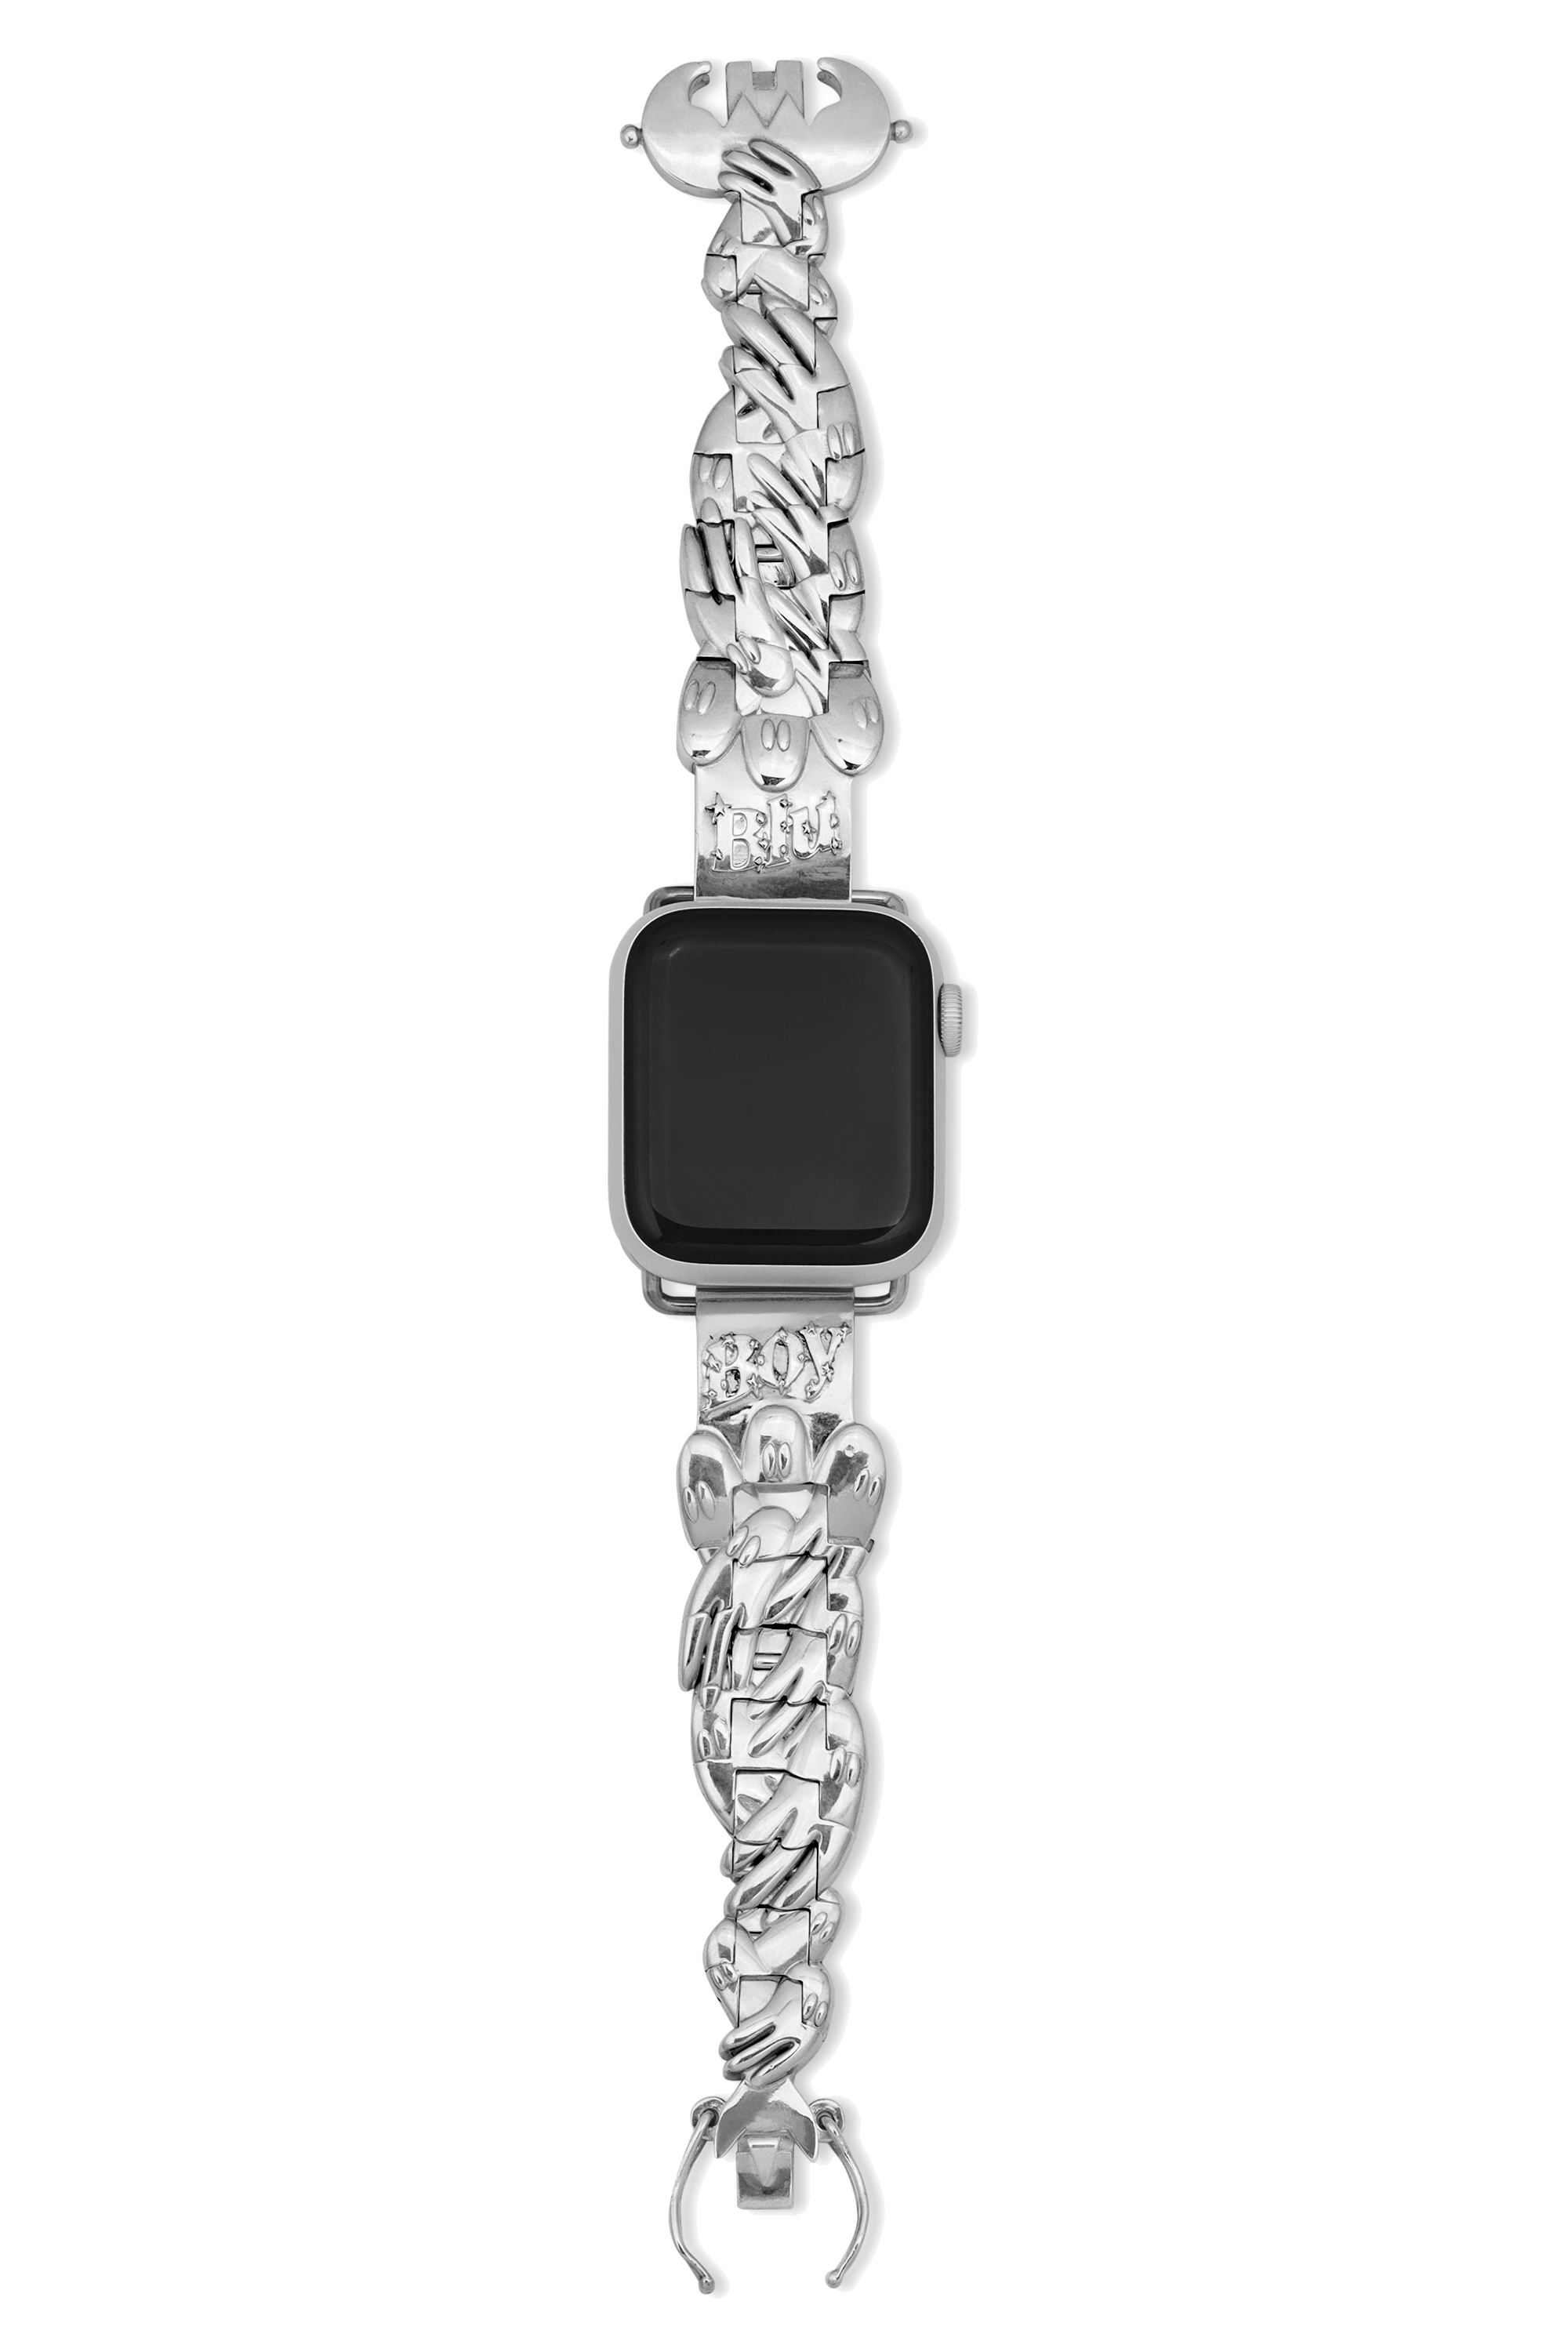 WNTD APPLE WATCH BRACELET (MADE TO ORDER)